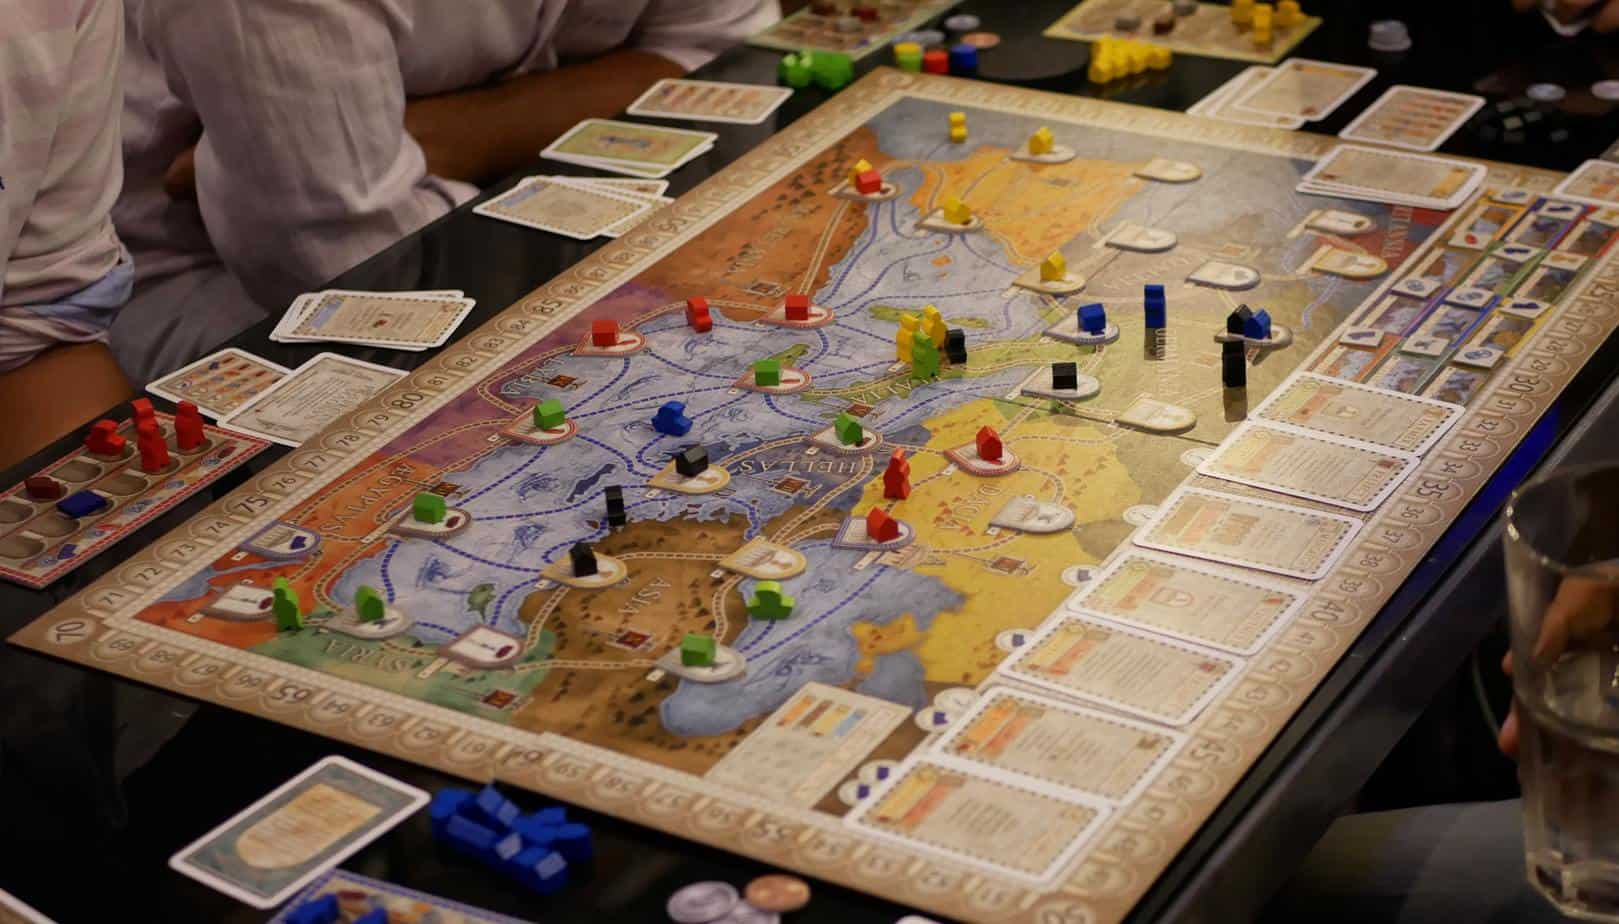 5 interesting board games for an evening